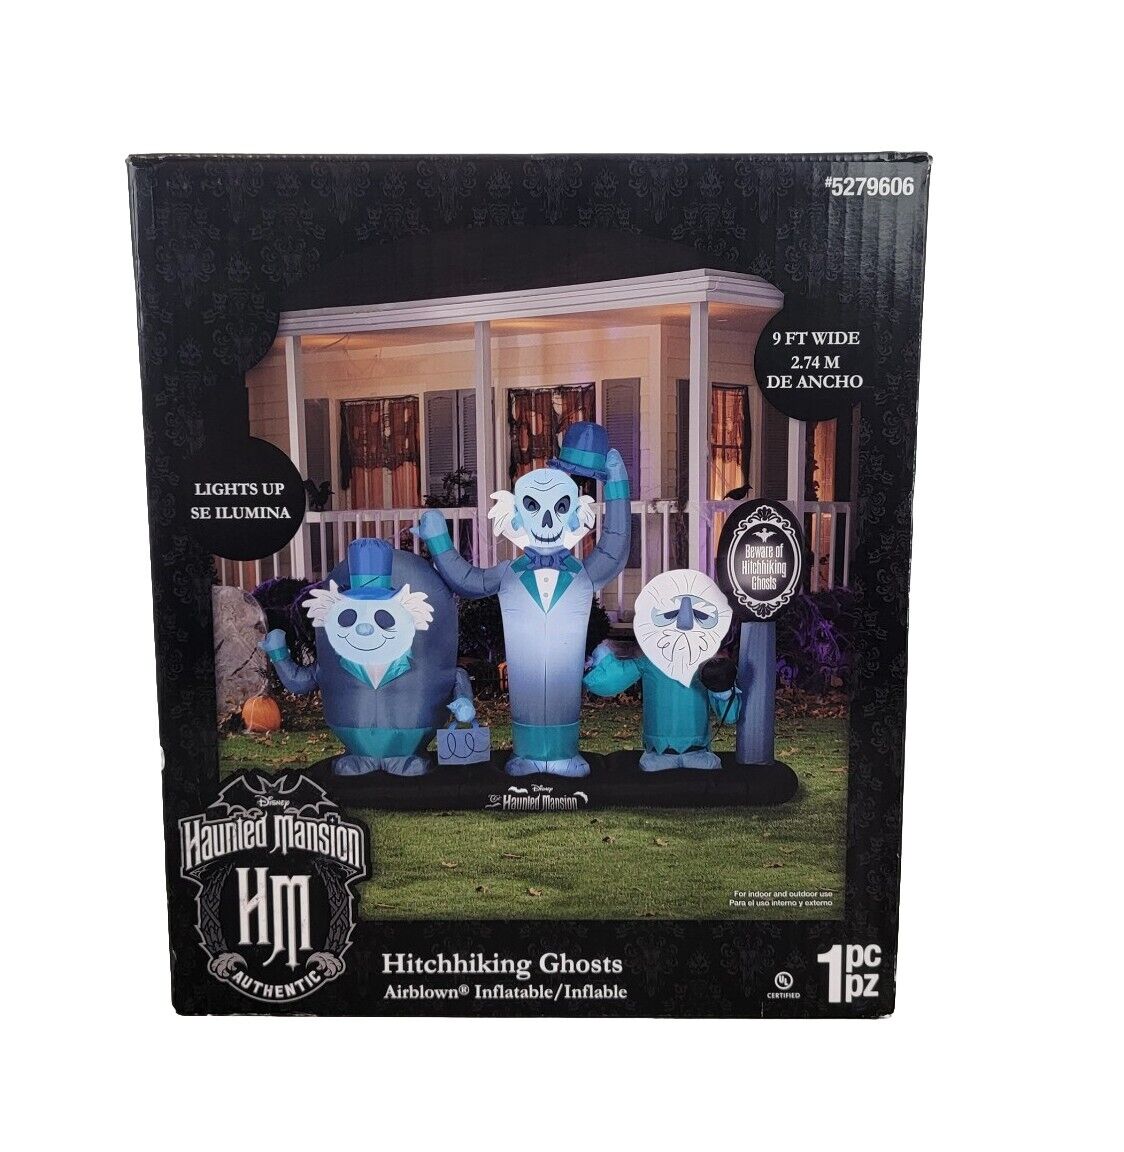 Disney Haunted Mansion Hitchhiking Ghosts Blowup Inflatable Light Up 9ft Wide